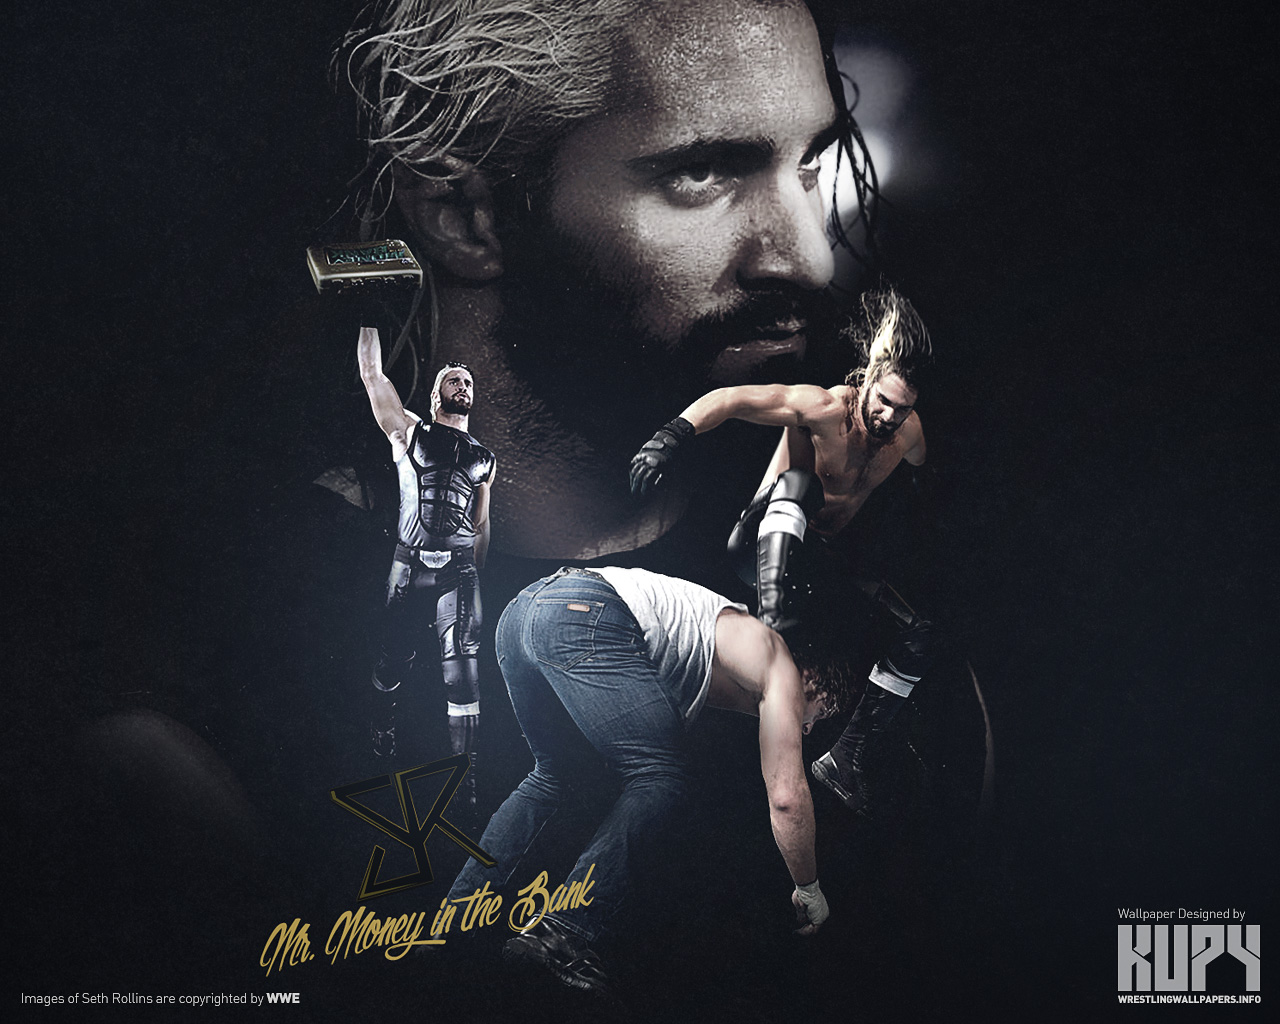 Kupy Wrestling Wallpapers The Latest Source For Your Wwe Wrestling Wallpaper Needs Mobile Hd And 4k Resolutions Available Blog Archive New Shield Aftermath Seth Rollins Wallpaper Kupy Wrestling Wallpapers